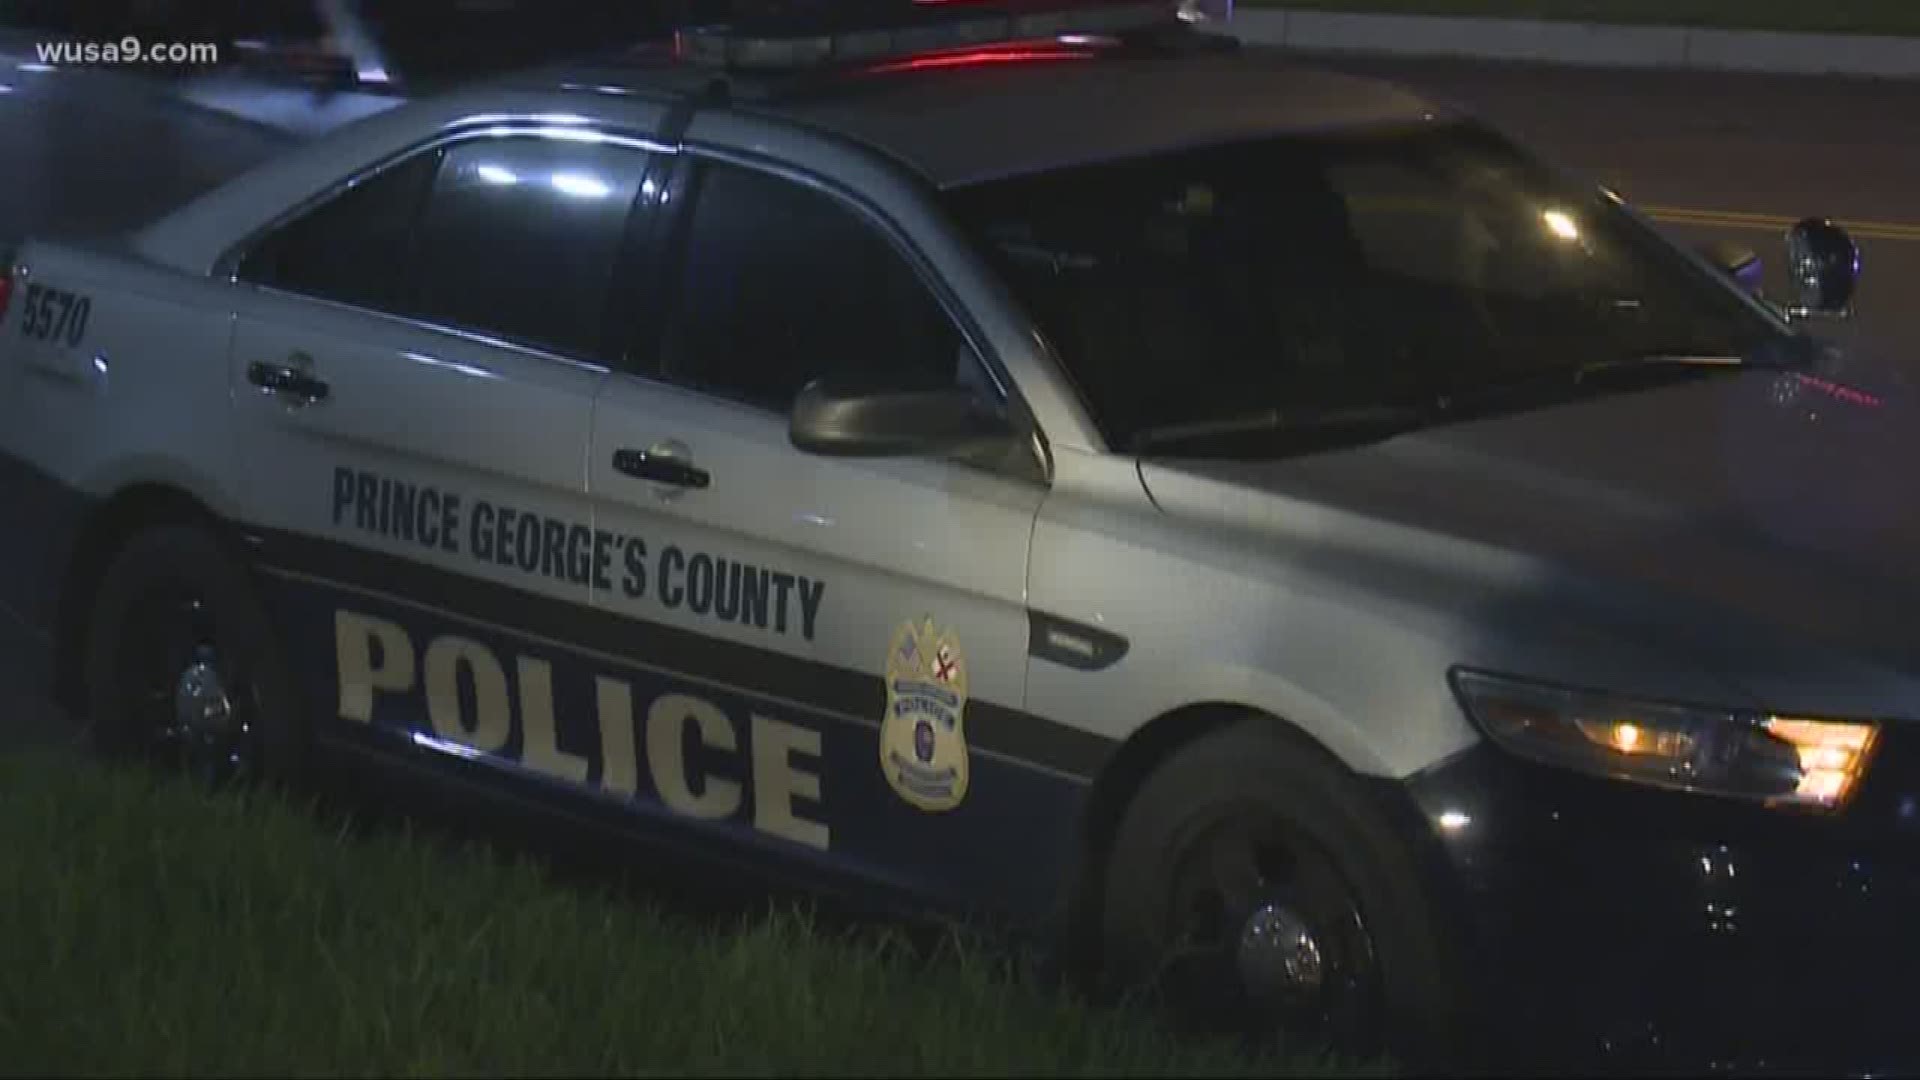 A Prince George’s County officer who was suspended for an alleged sexual assault is just one of the latest incidents plaguing the police department.